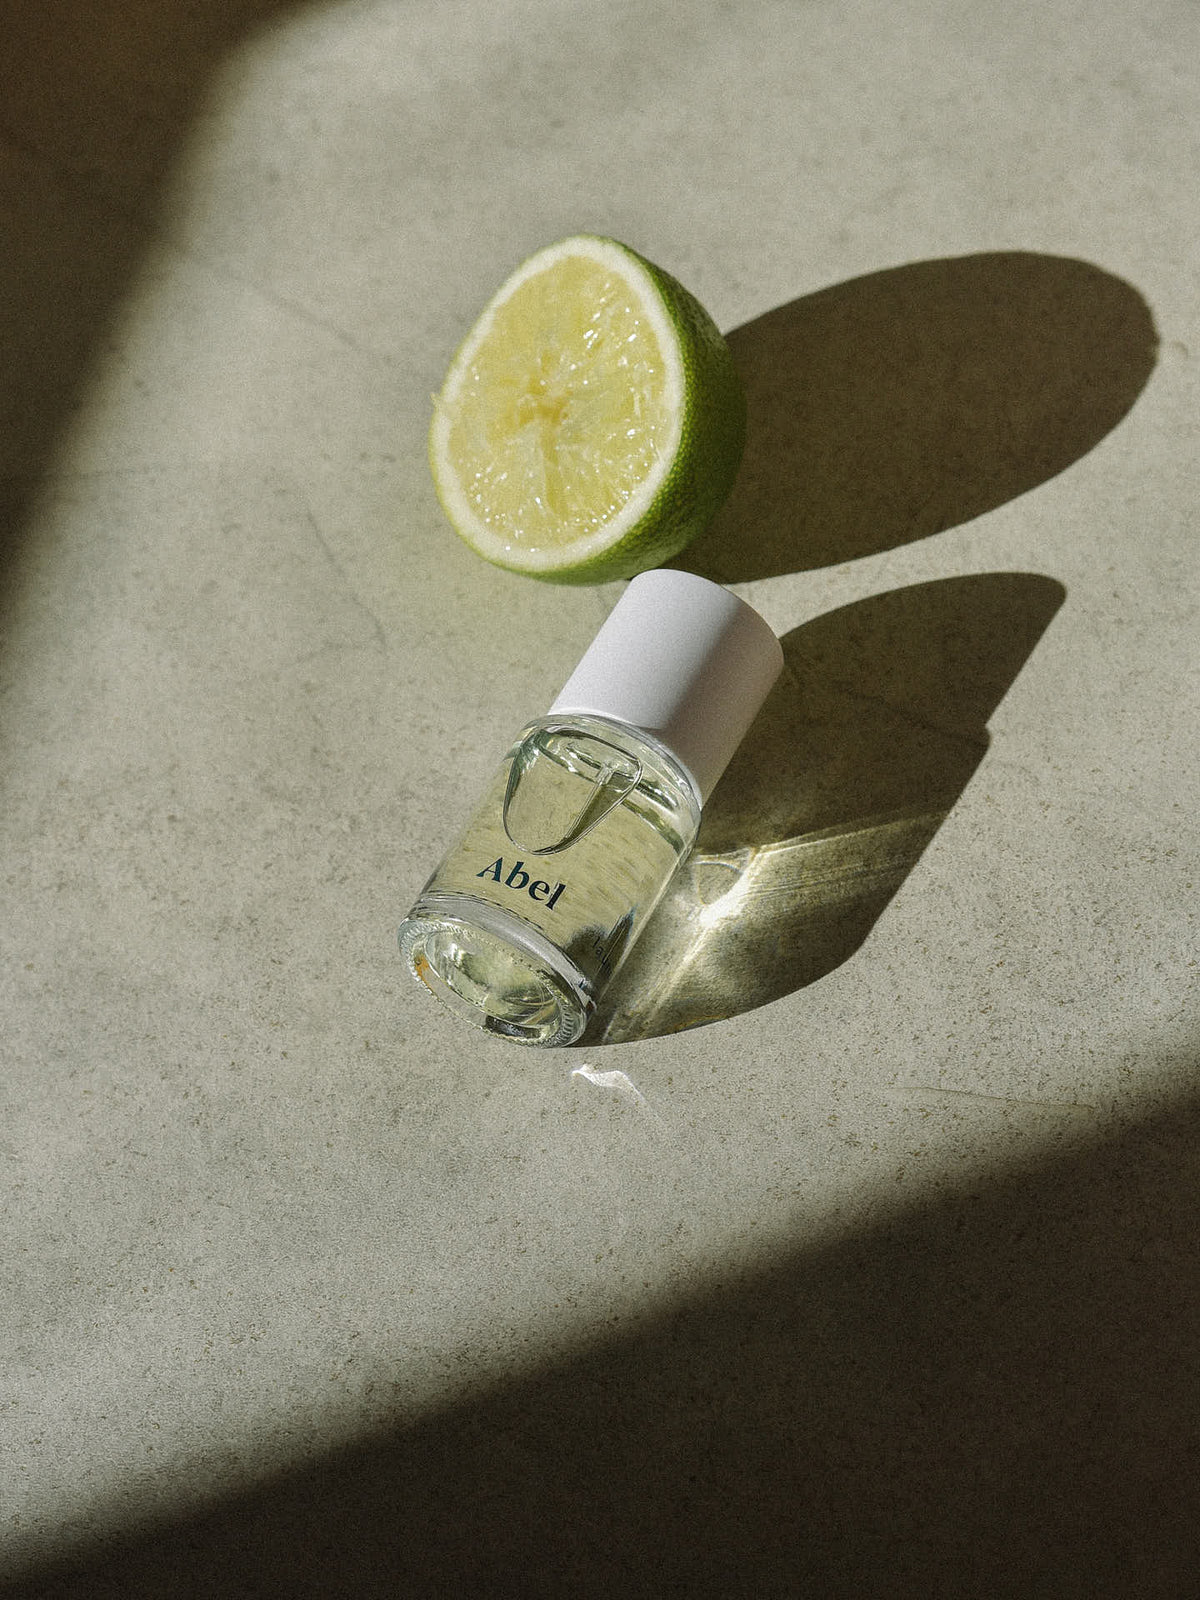 A perfume bottle labeled &quot;Abel&quot; rests on a concrete surface next to a halved lime, its shadows cast by sunlight. This 100% natural, citrus eau de parfum is ethically sourced, bringing together purity and elegance in every scent of Laundry Day by Abel – a verdant, sun-filled citrus.